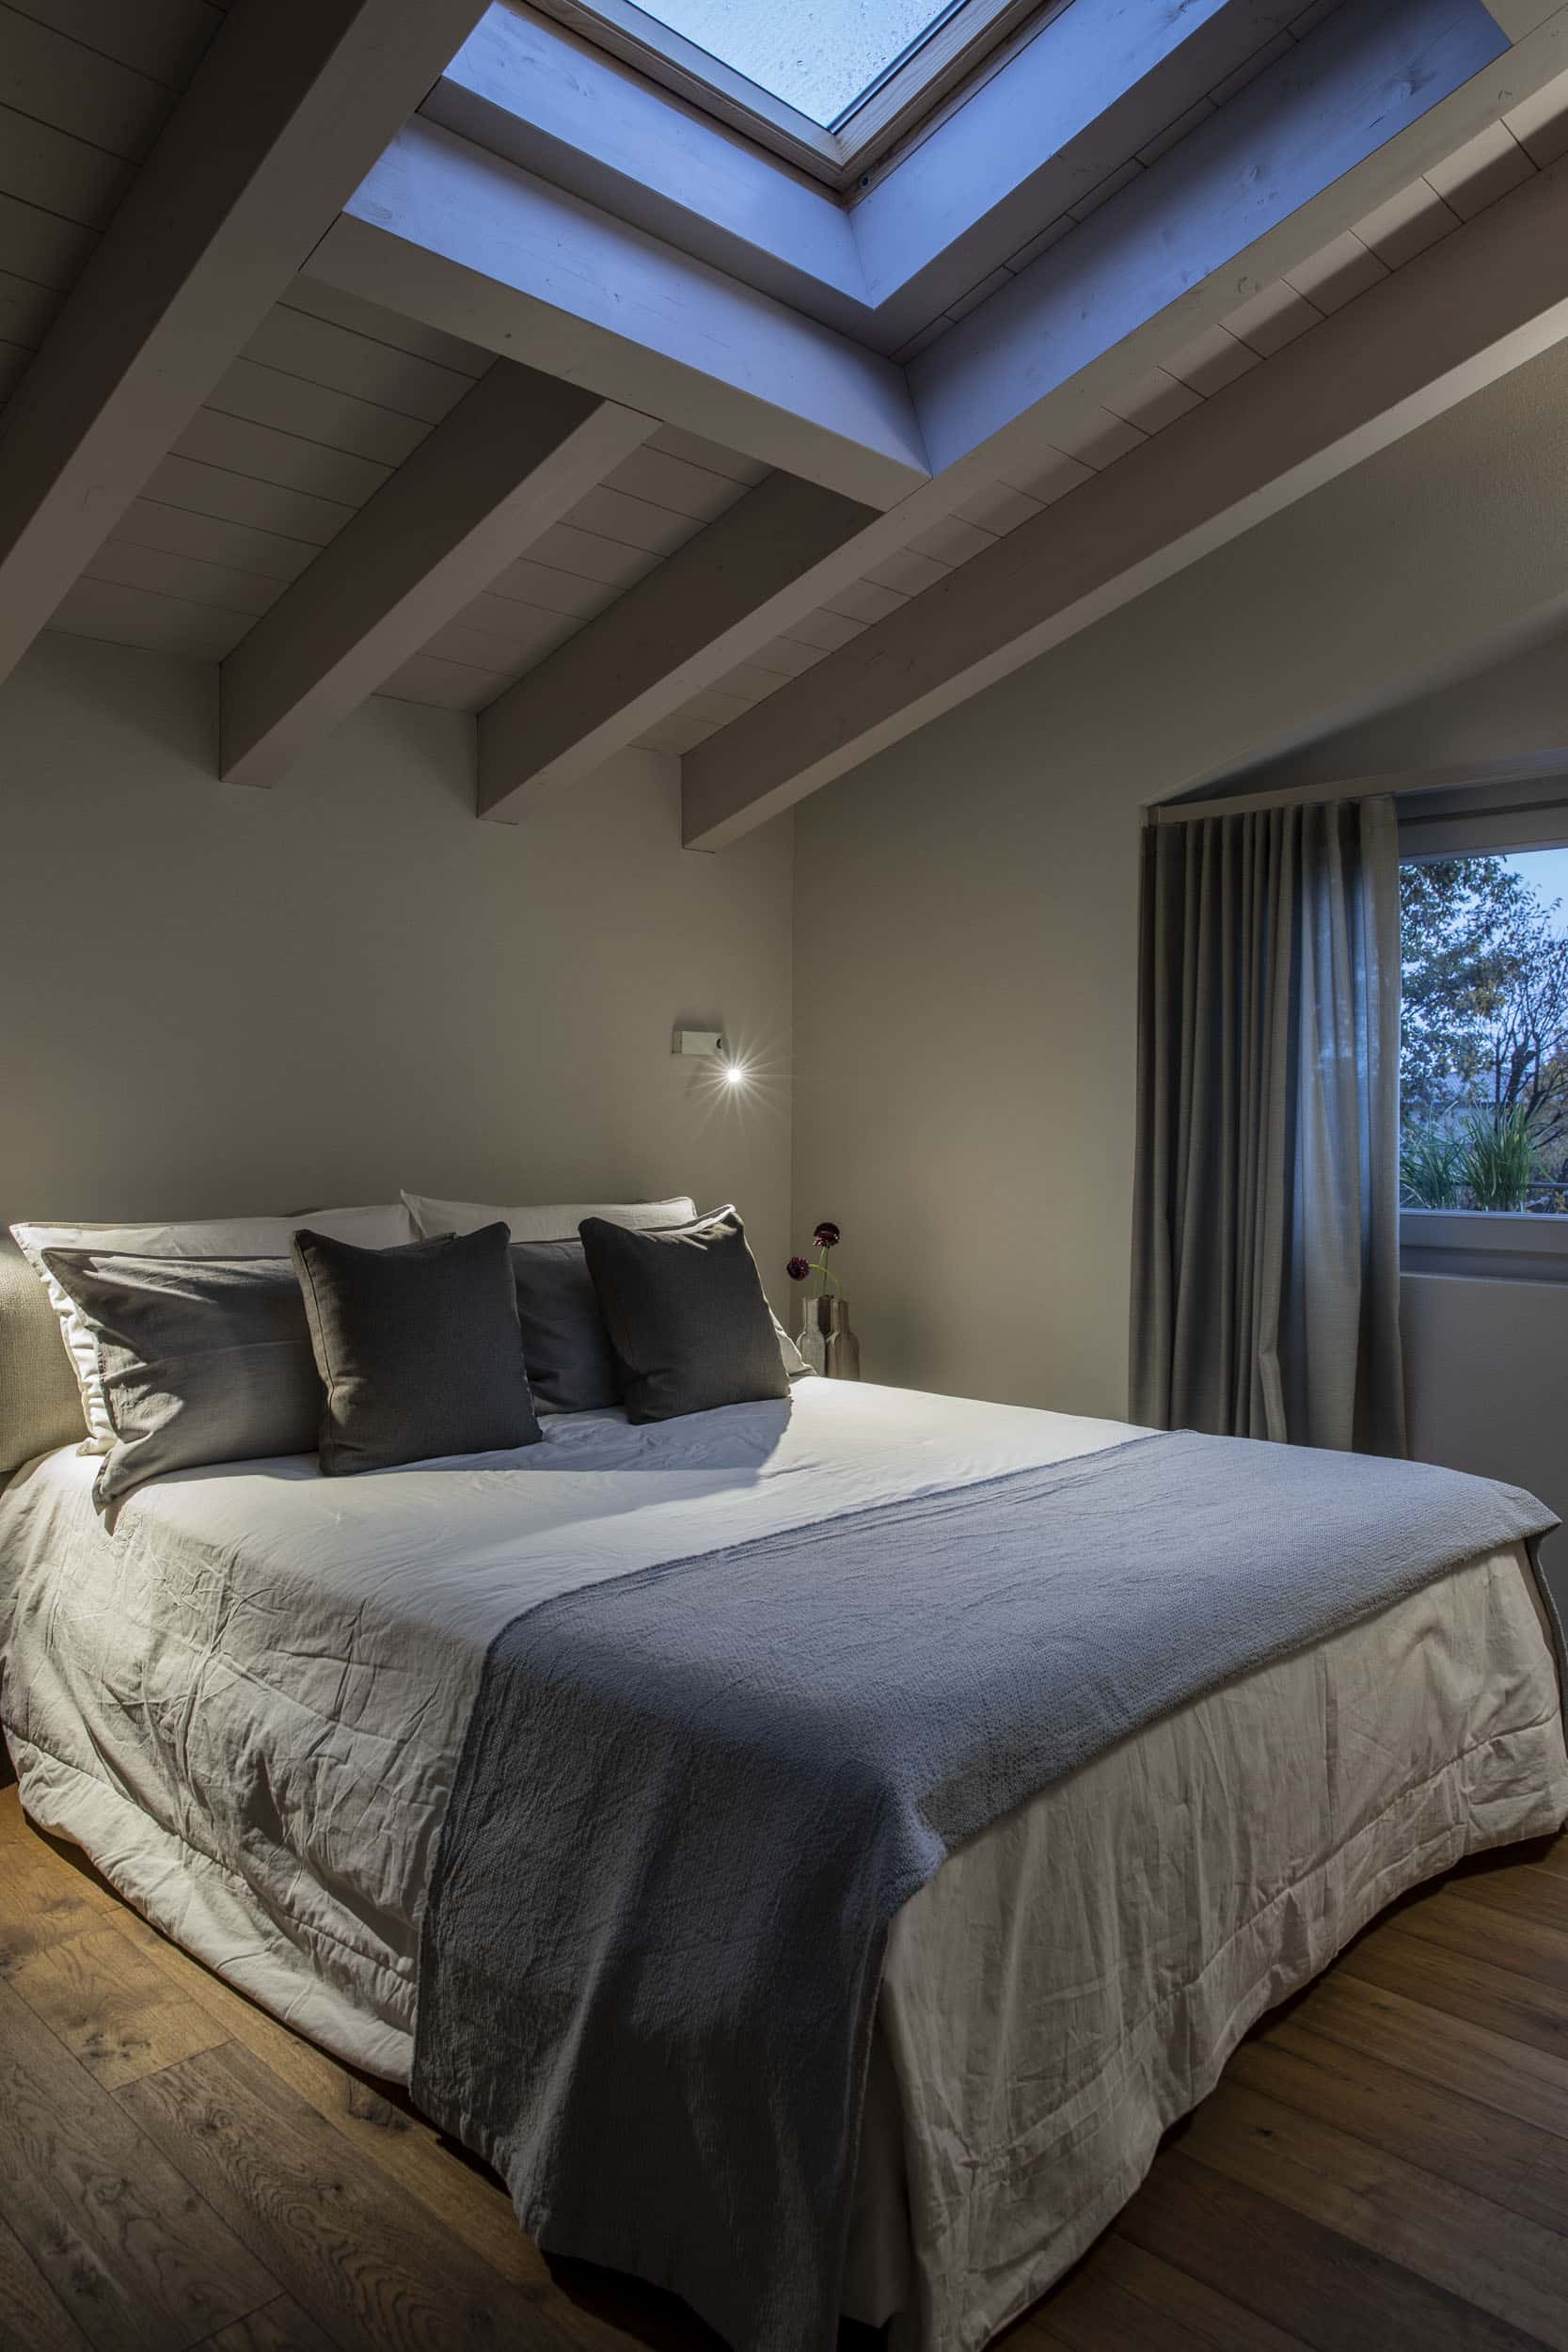 Il Mulino Relais Boutique Hotel in Piacenza - Bedrooms and Suites